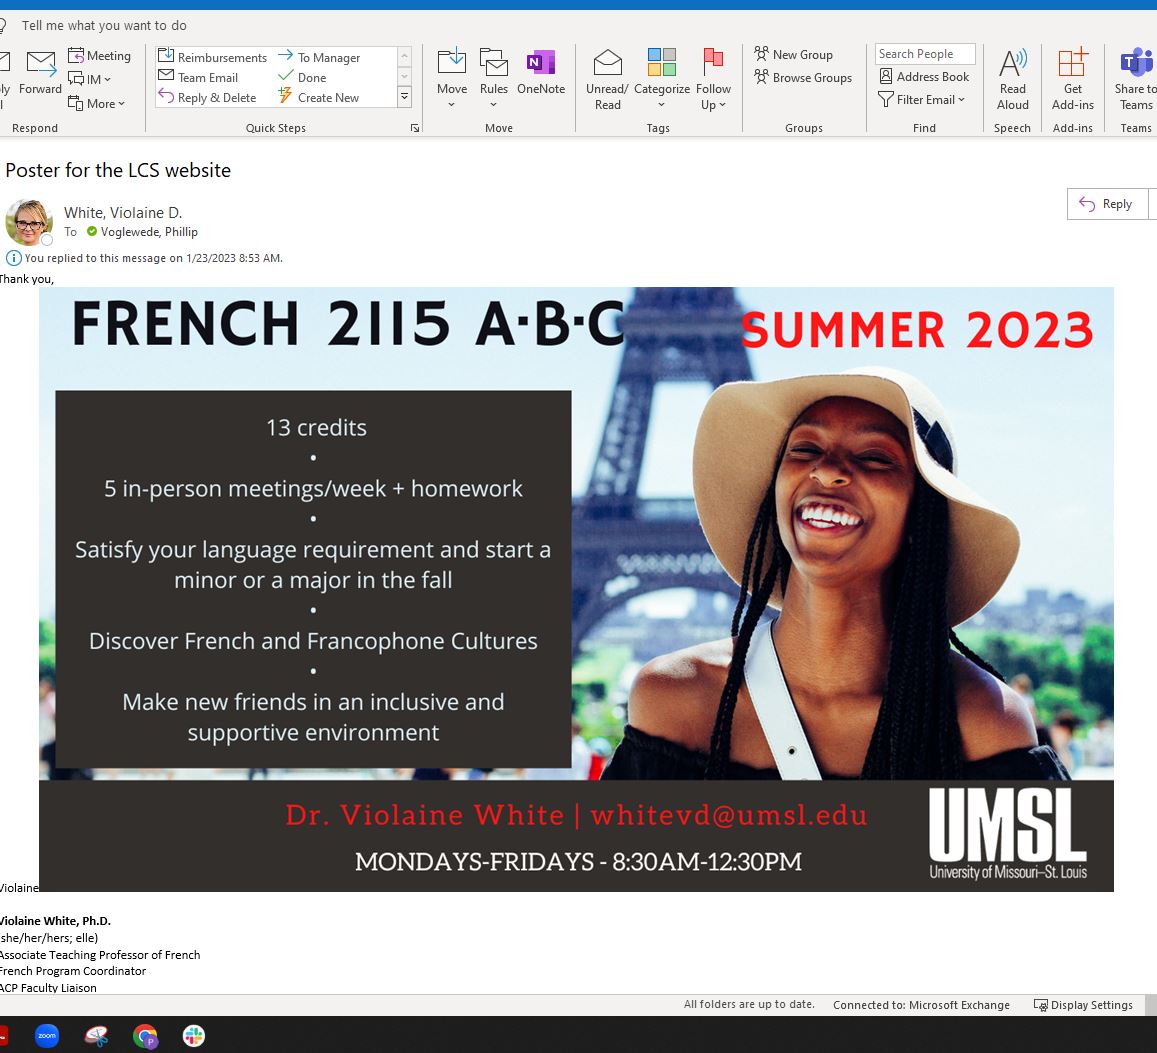 Learn French During the Summer